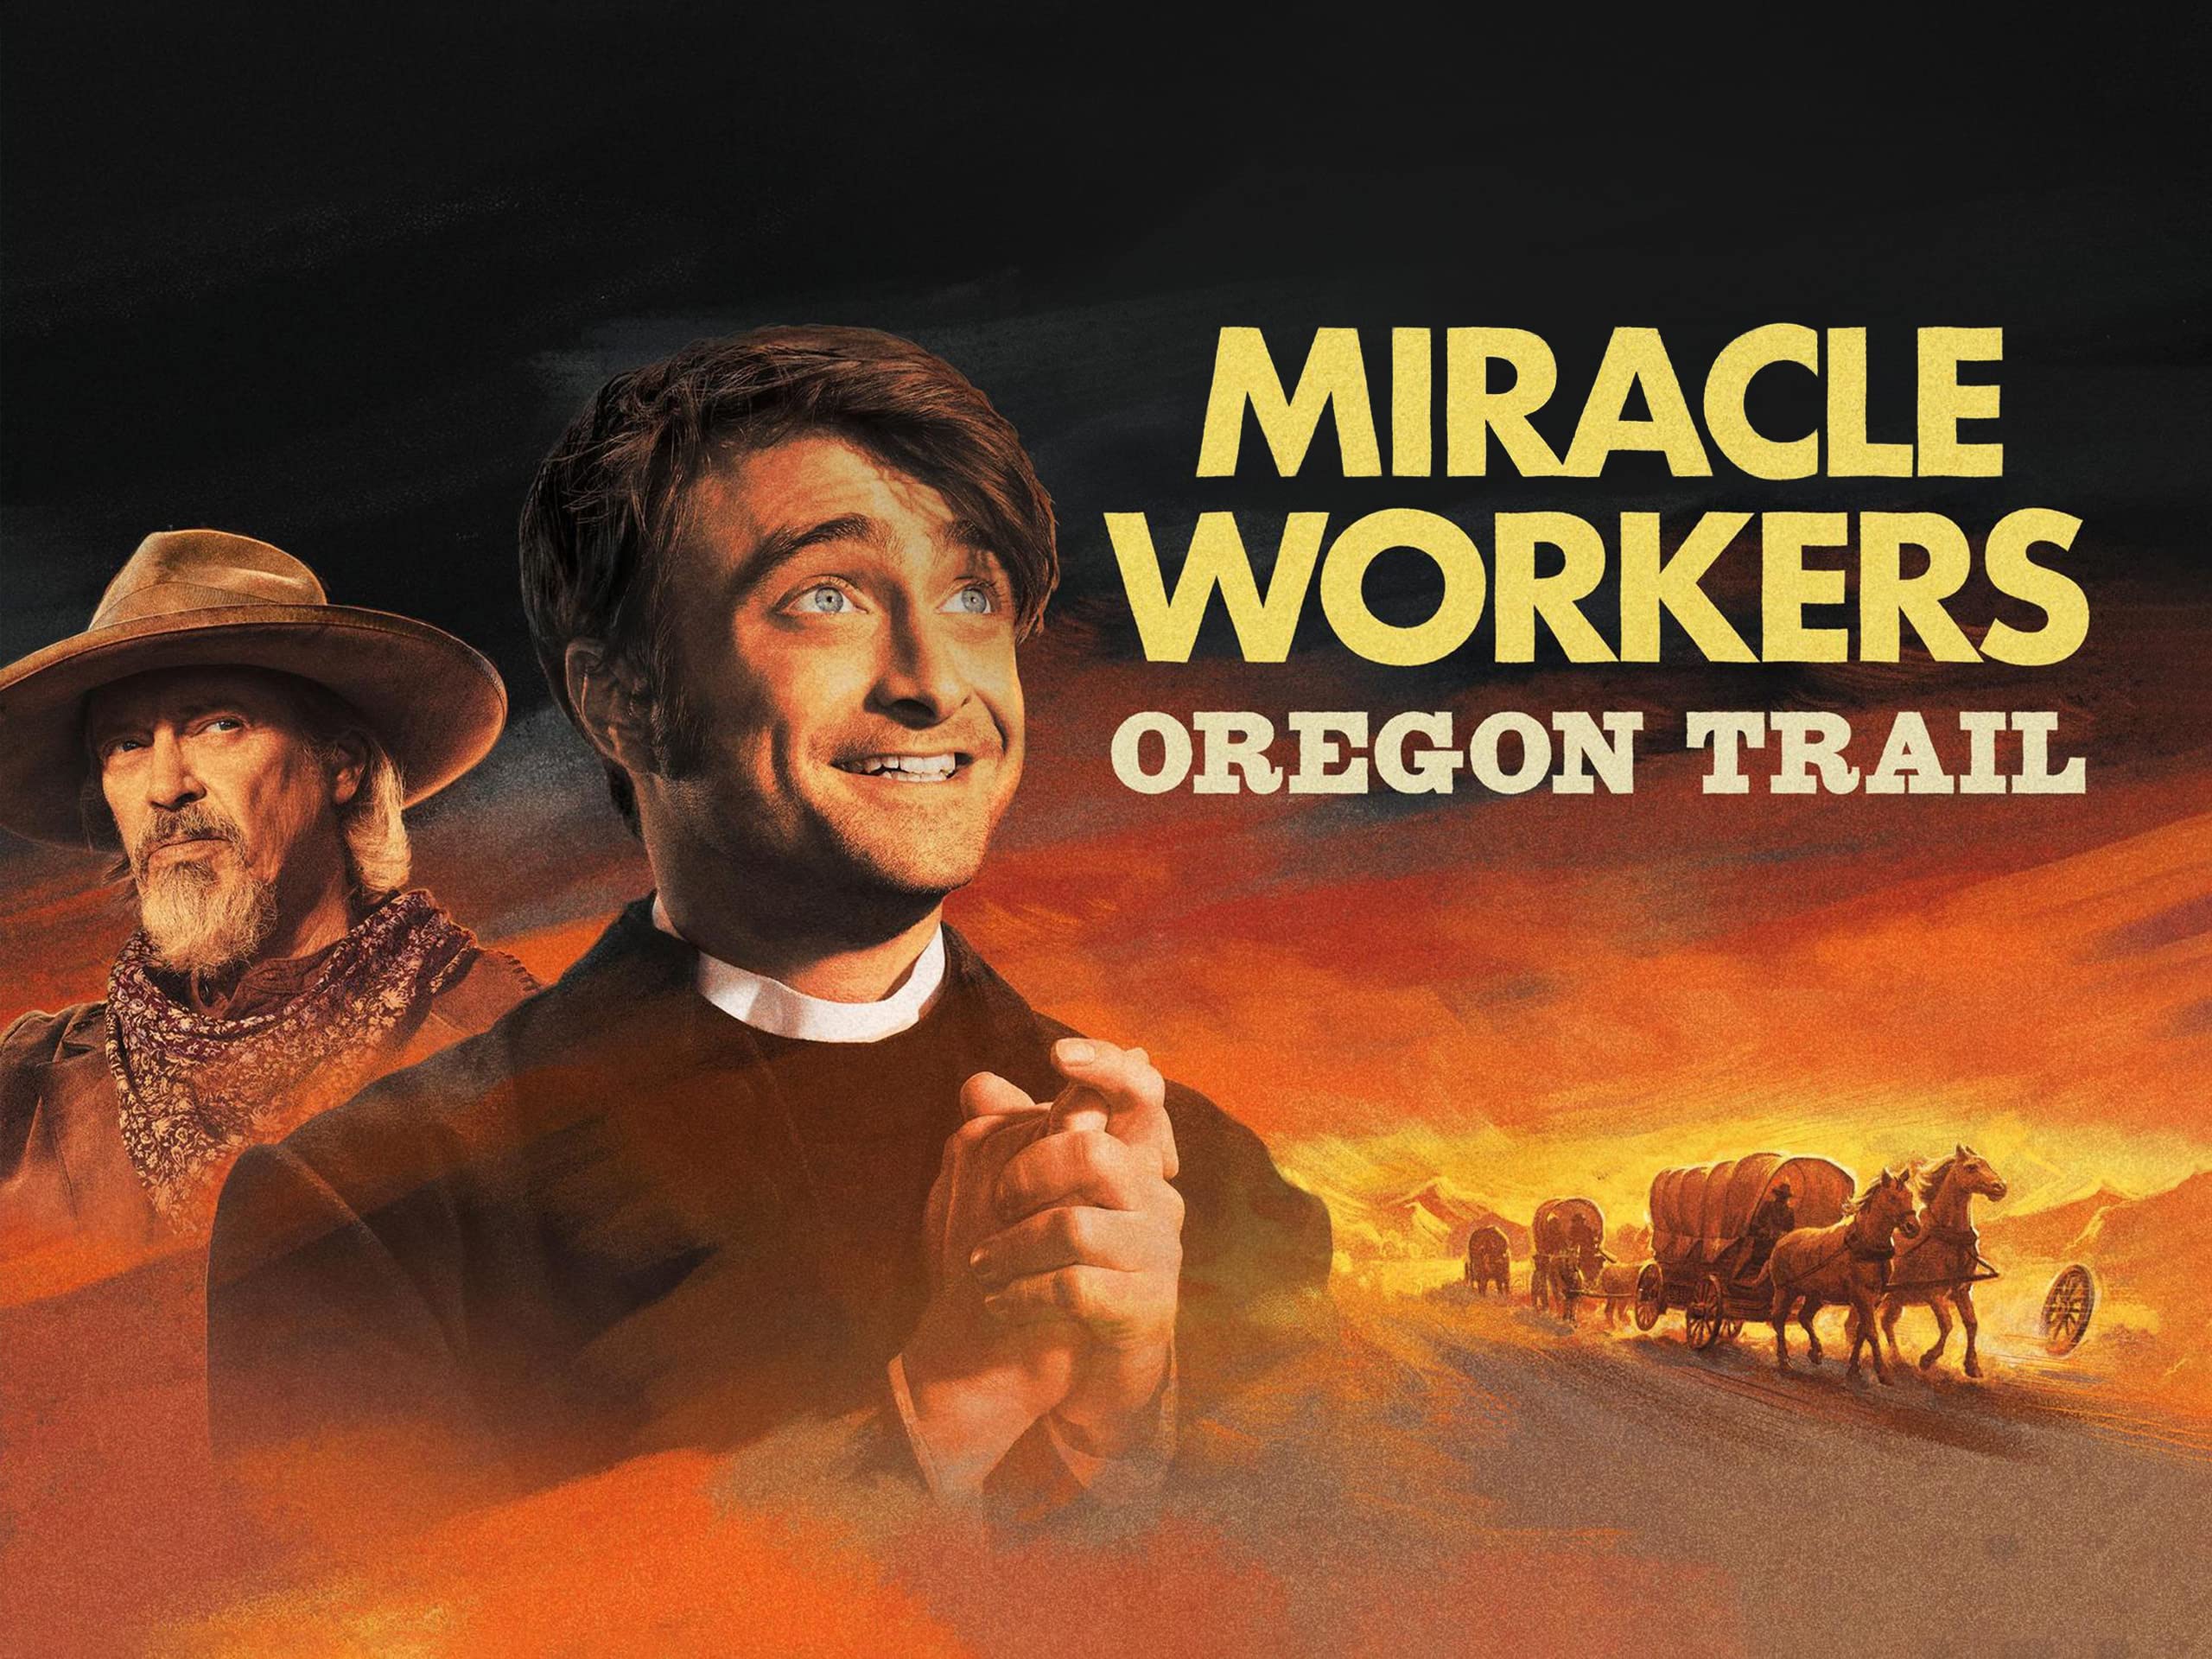 How to Watch and Stream Miracle Workers Season 3 15